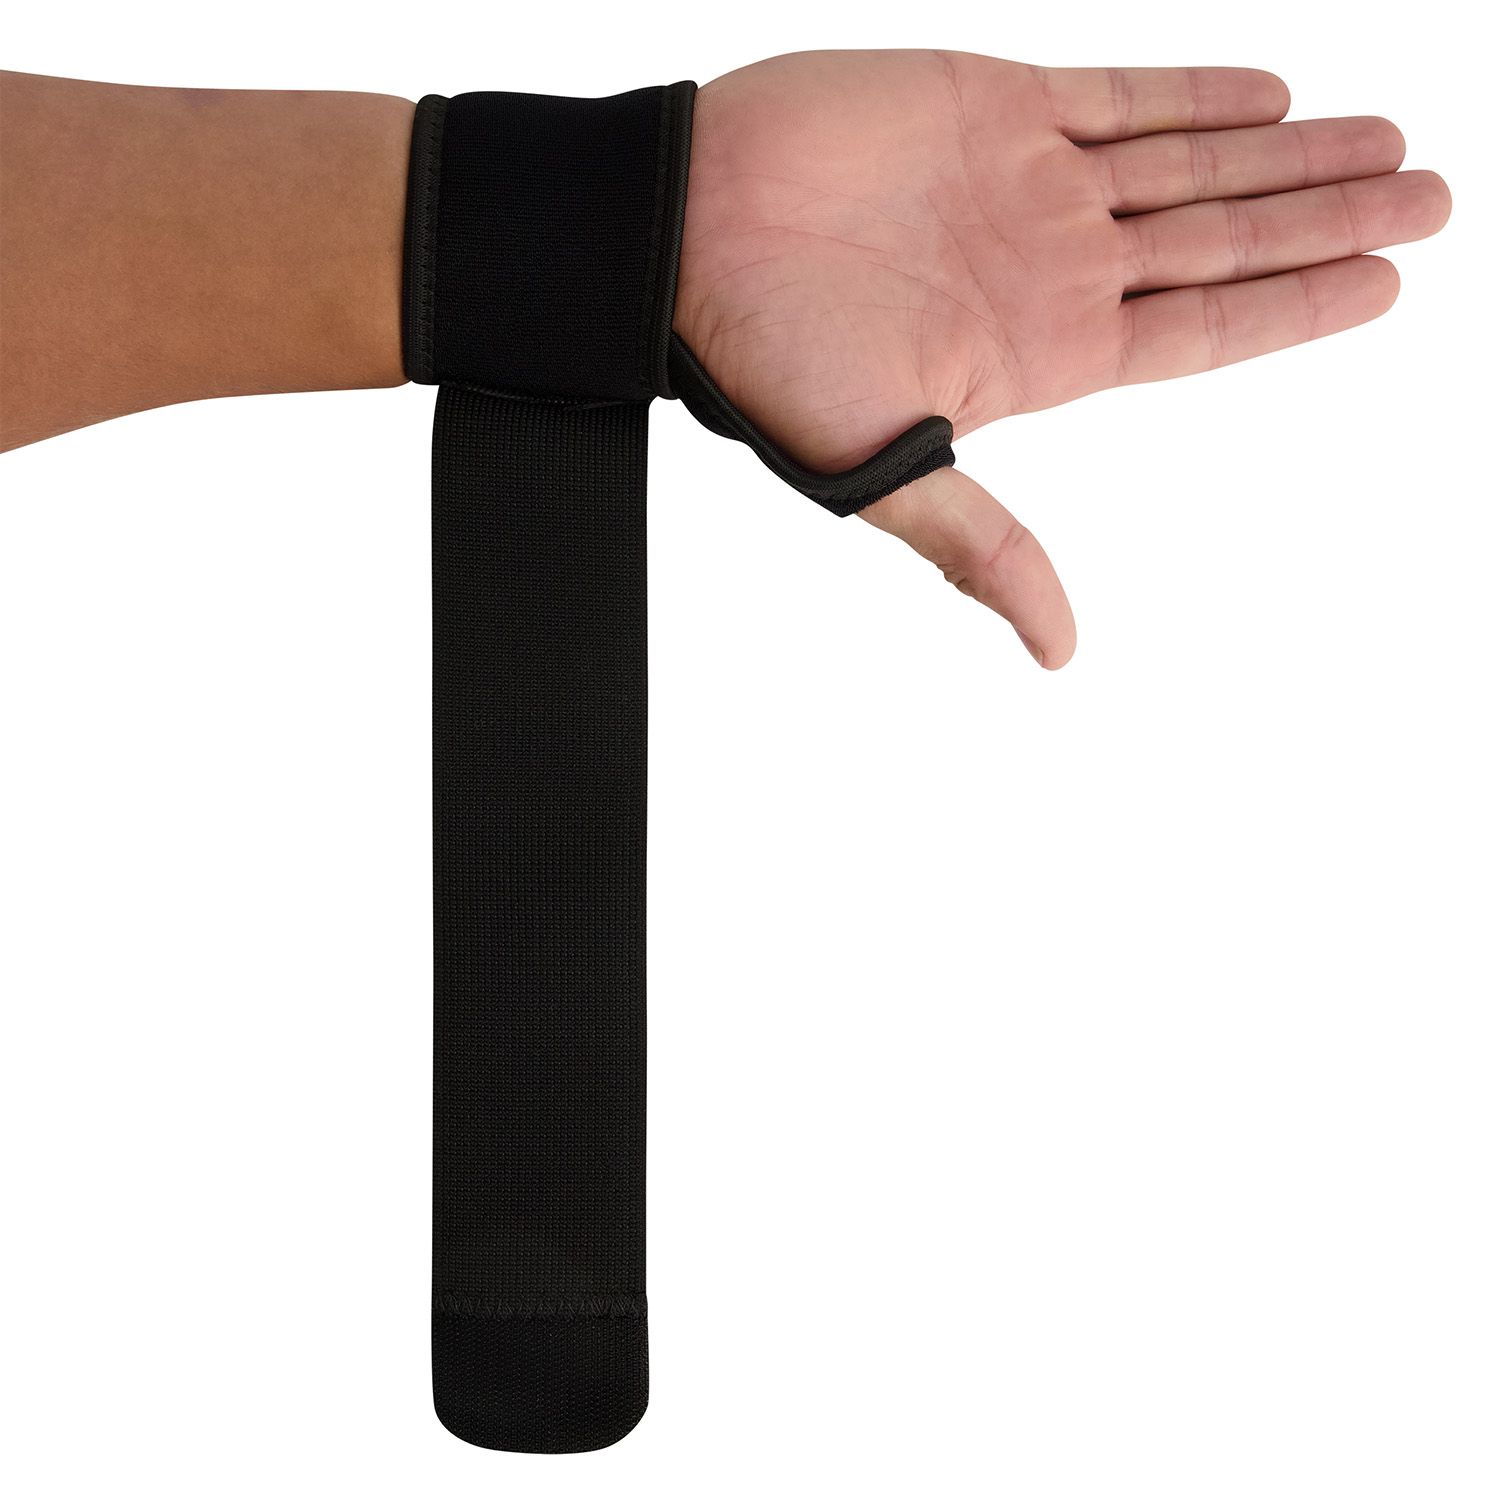 medidu wrist support with Velcro strap stretched out